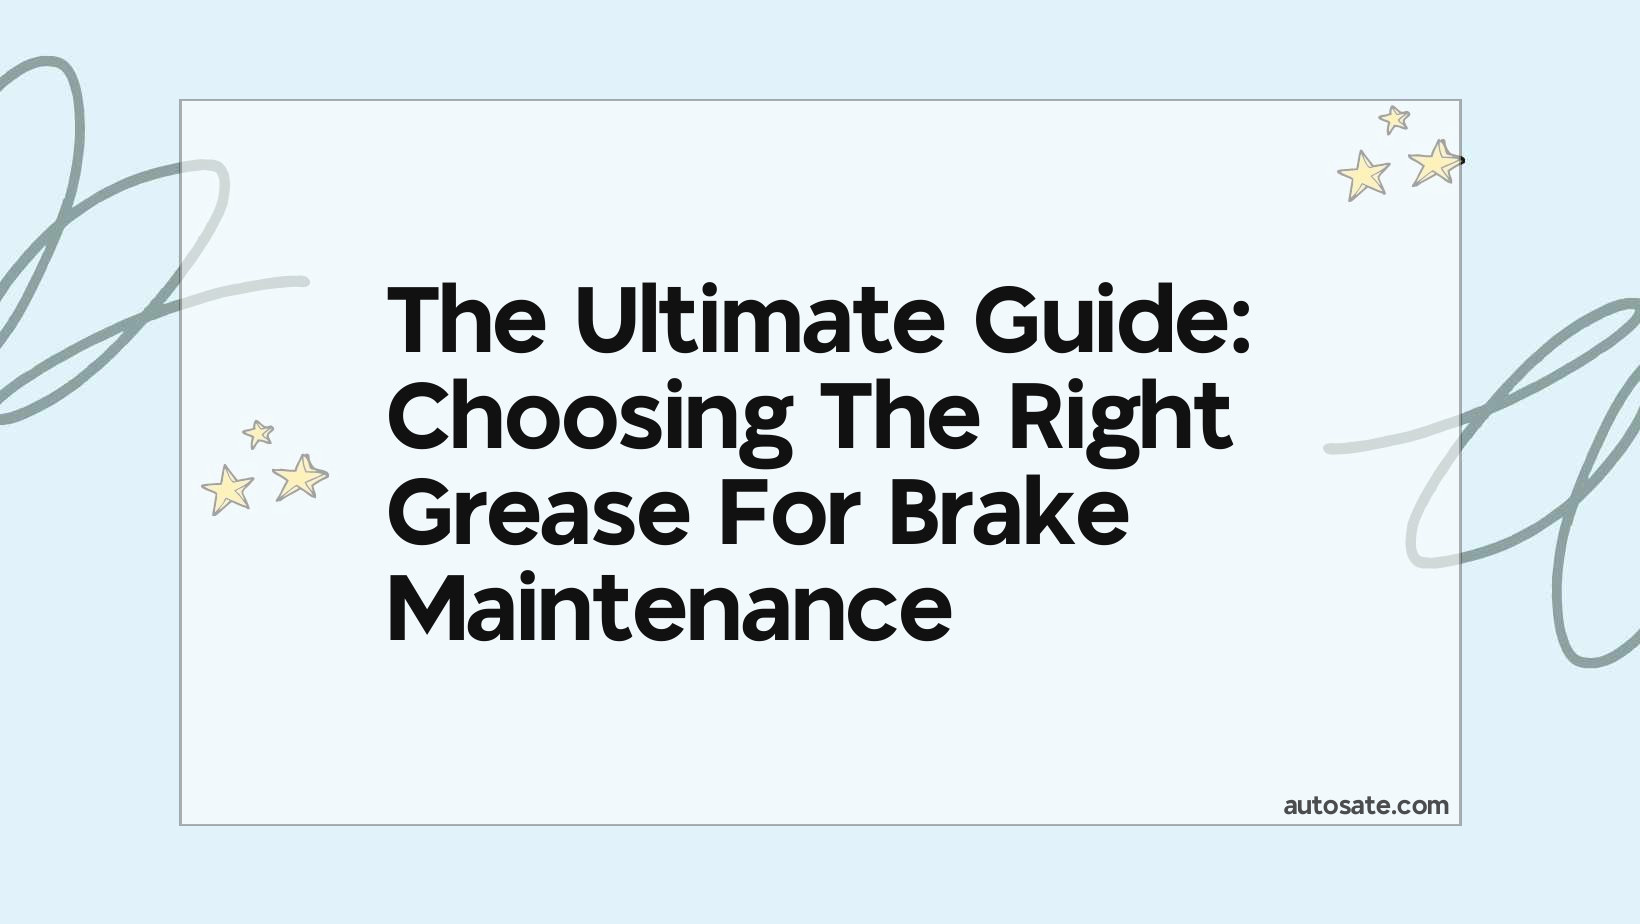 The Ultimate Guide: Choosing The Right Grease For Brake Maintenance